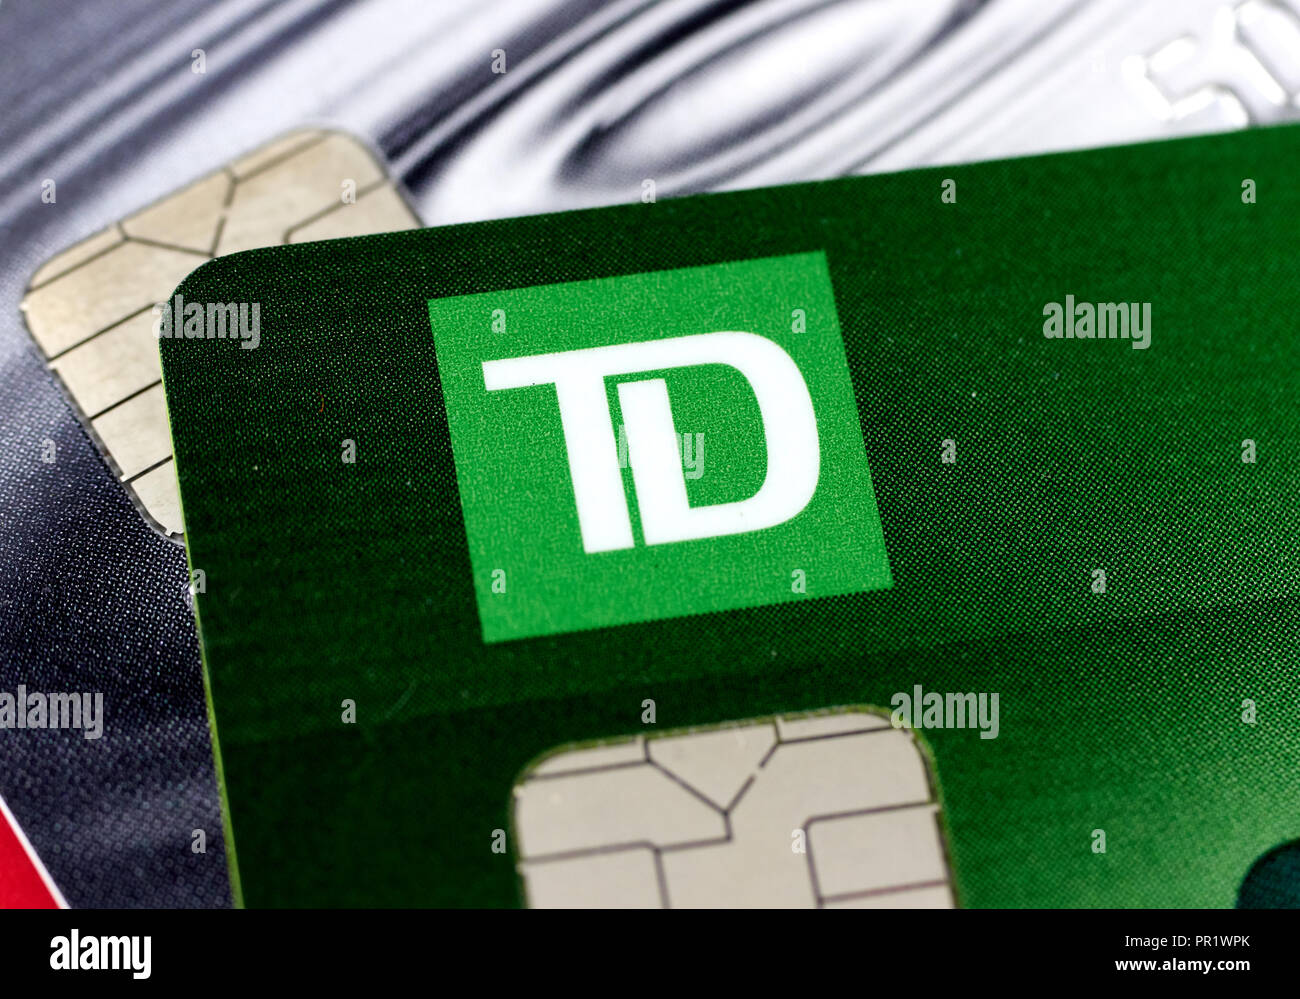 MONTREAL, CANADA - SEPTEMBER 21, 2018: TD Bank credit cards, close-up picture. The Toronto Dominion Bank is a Canadian multinational banking and finan Stock Photo